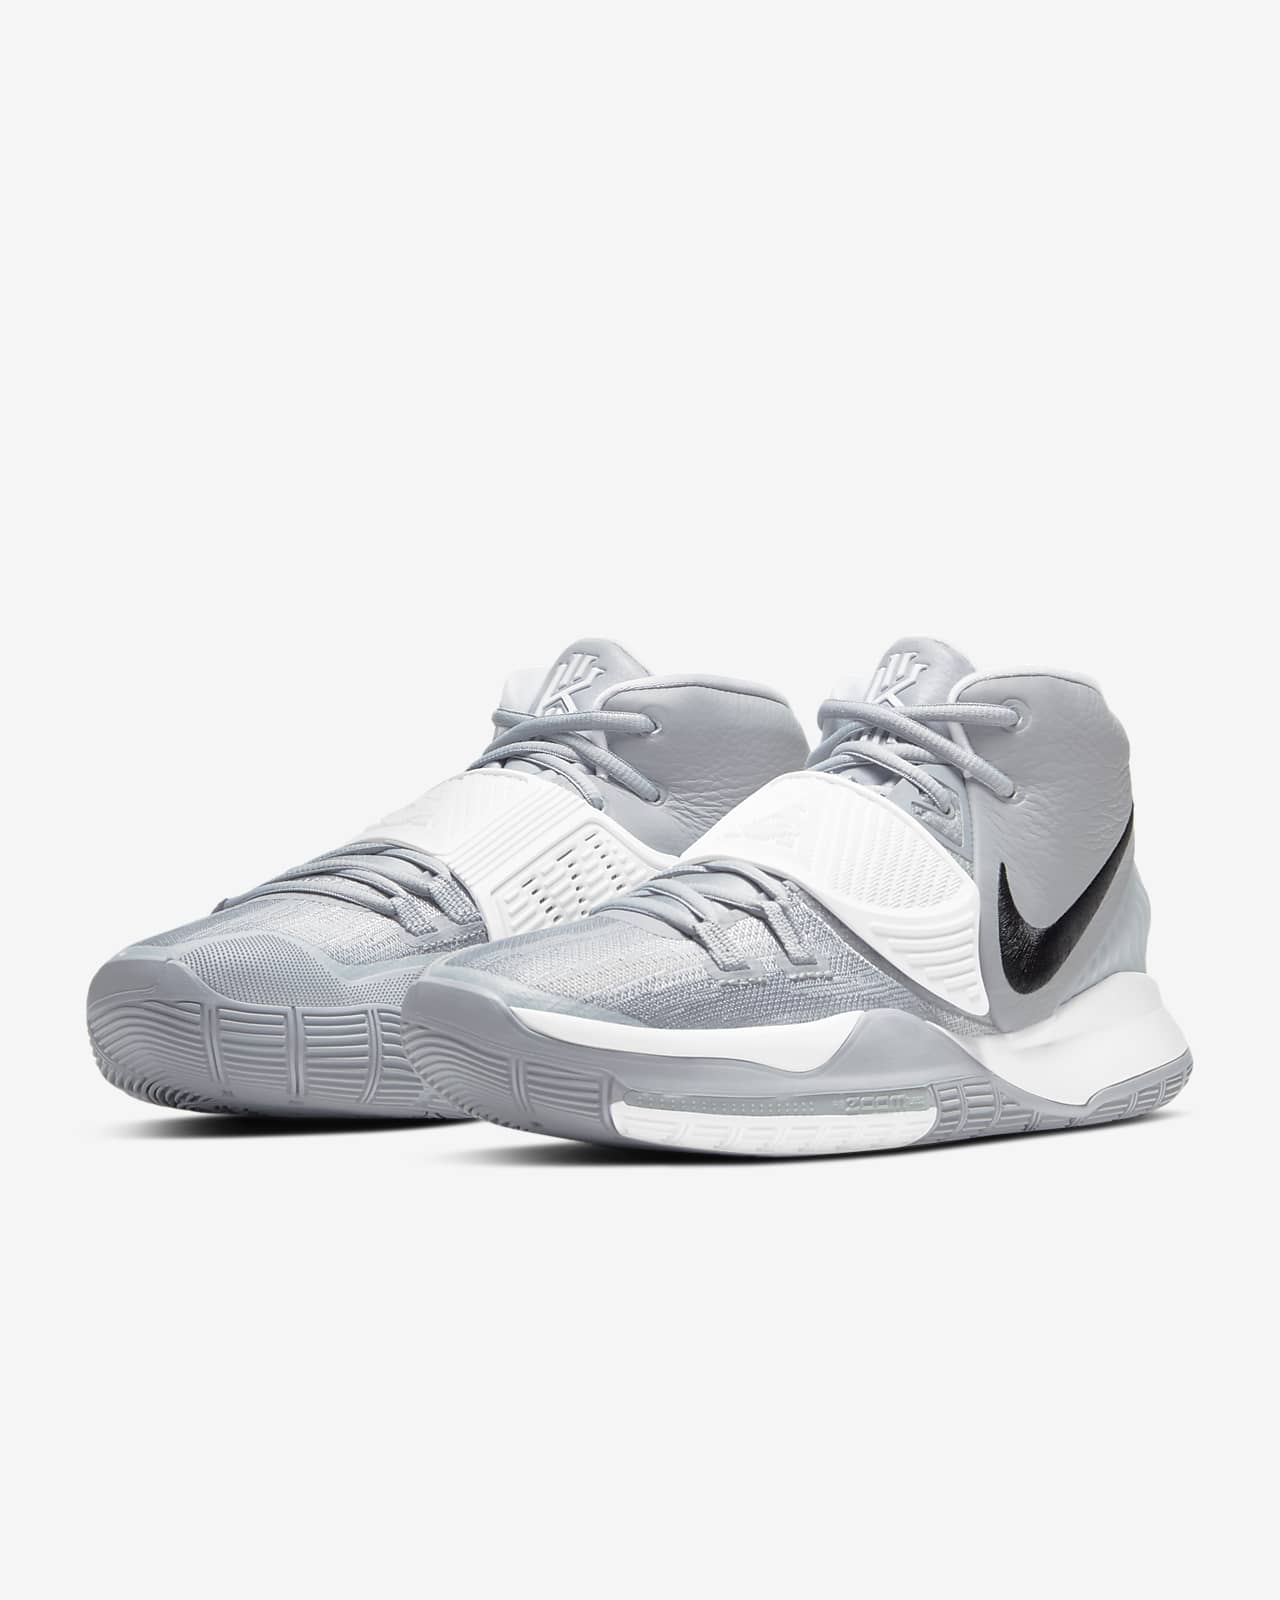 kyrie shoes grey